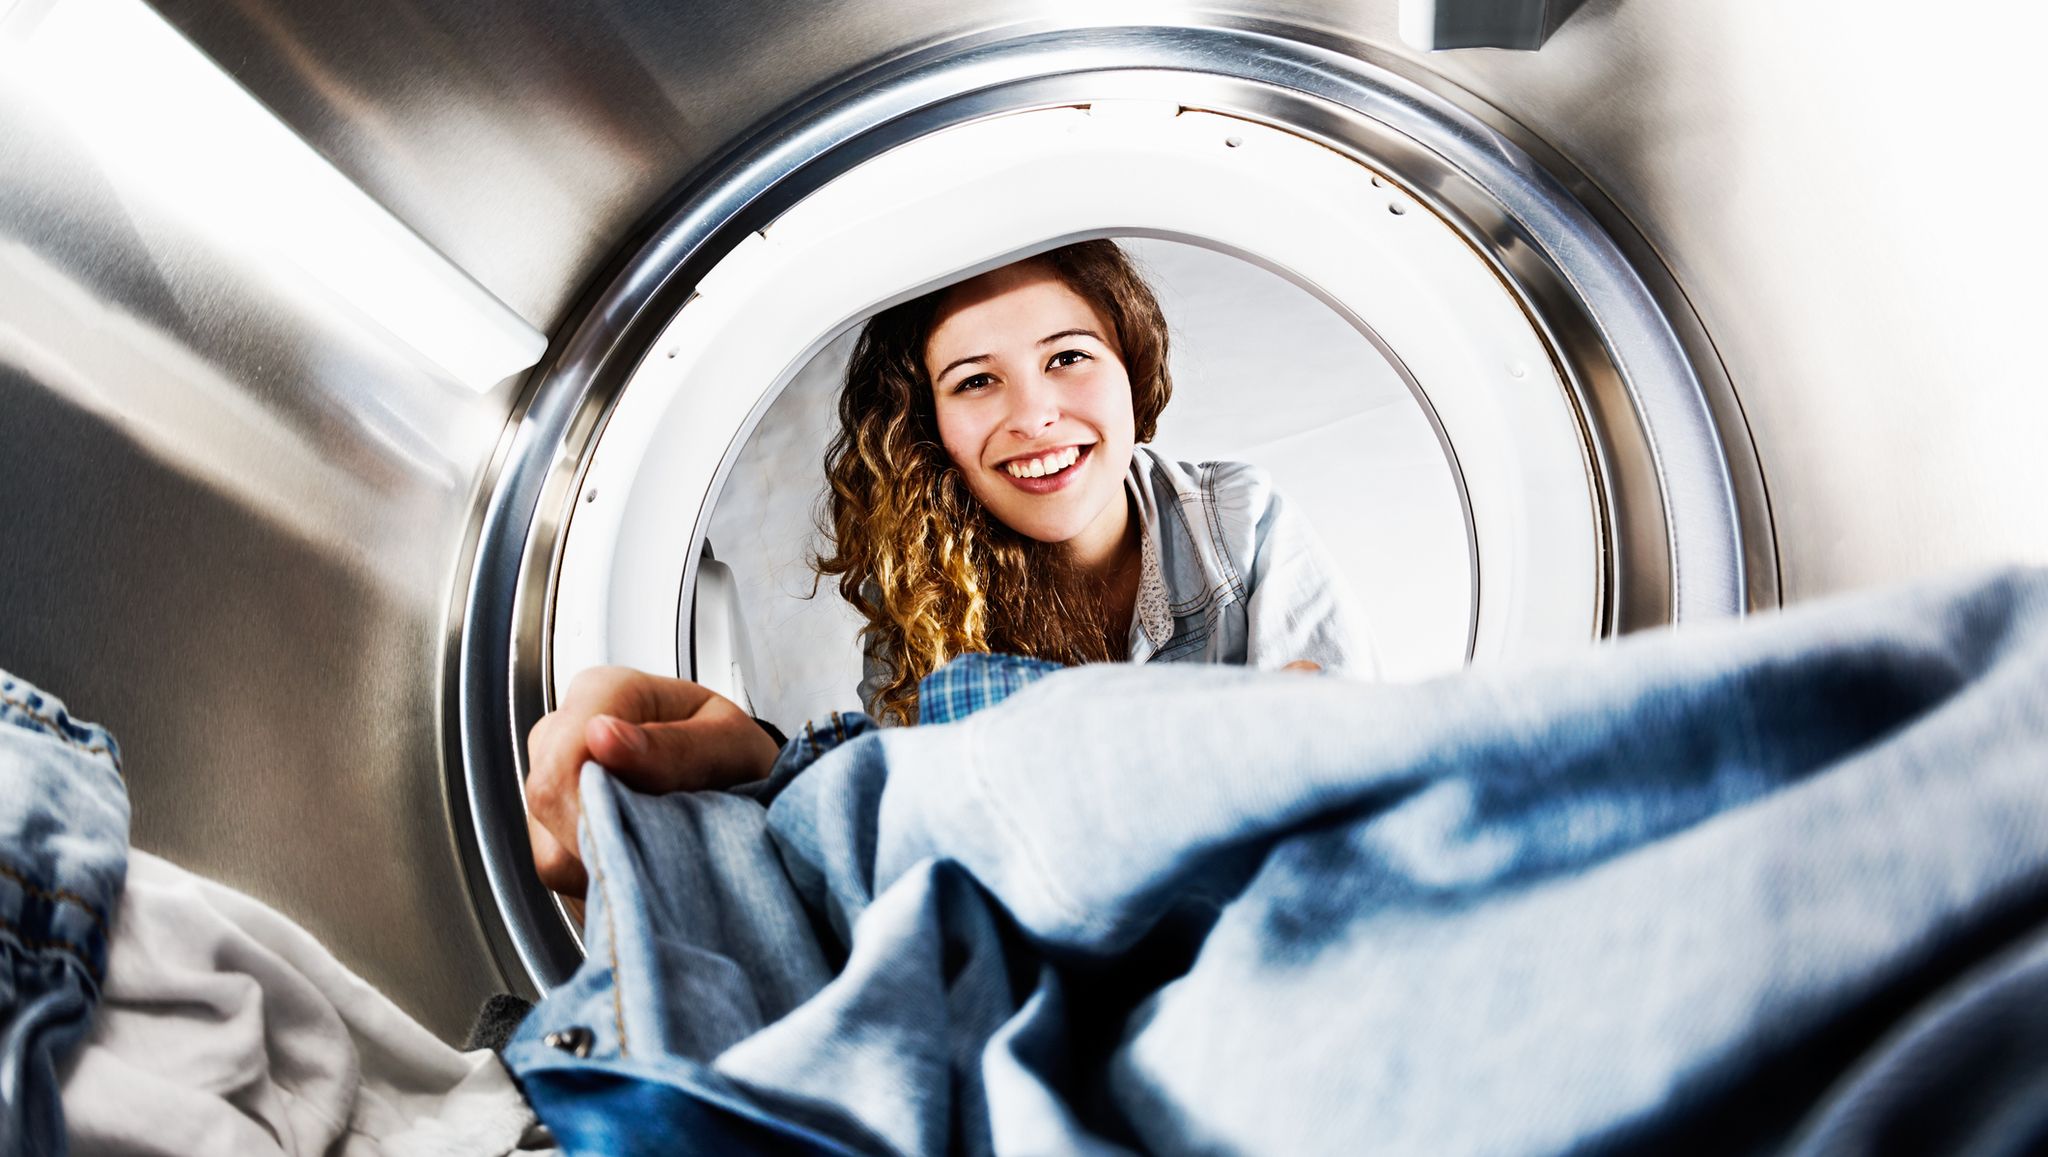 Smiling blonde beauty loads her tumble dryer: seens from inside